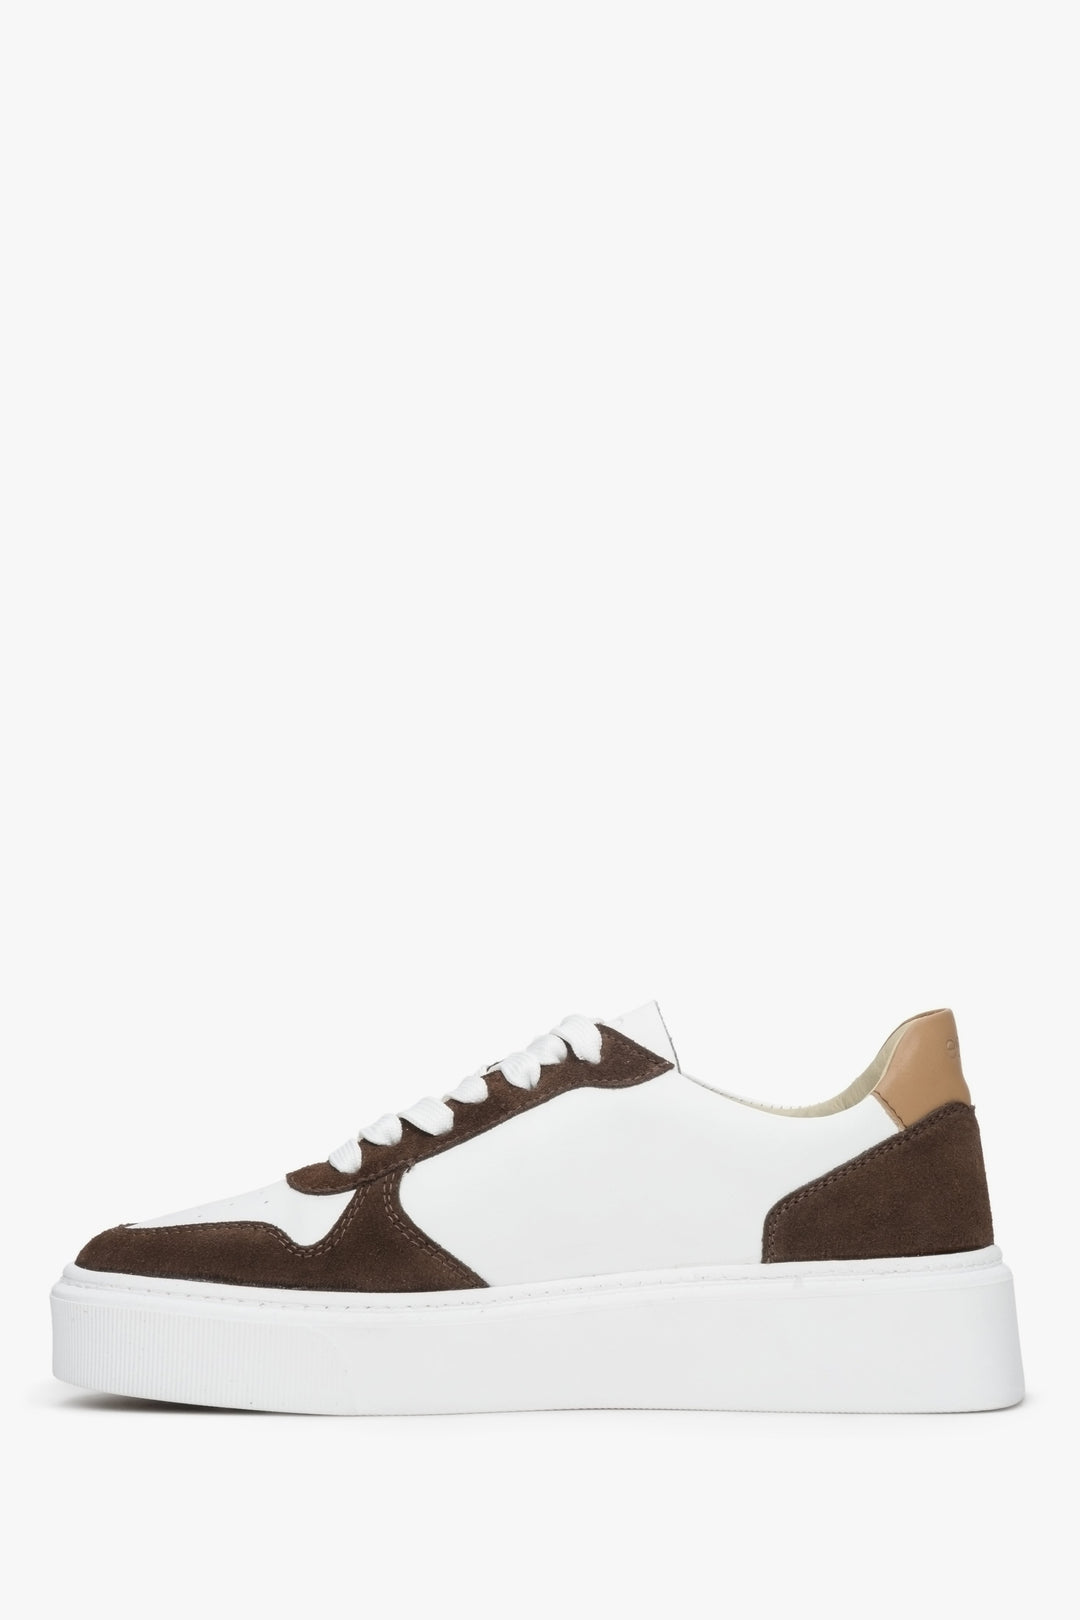 Women's sneakers made of combined materials, leather and velour in a shade of white and brown.